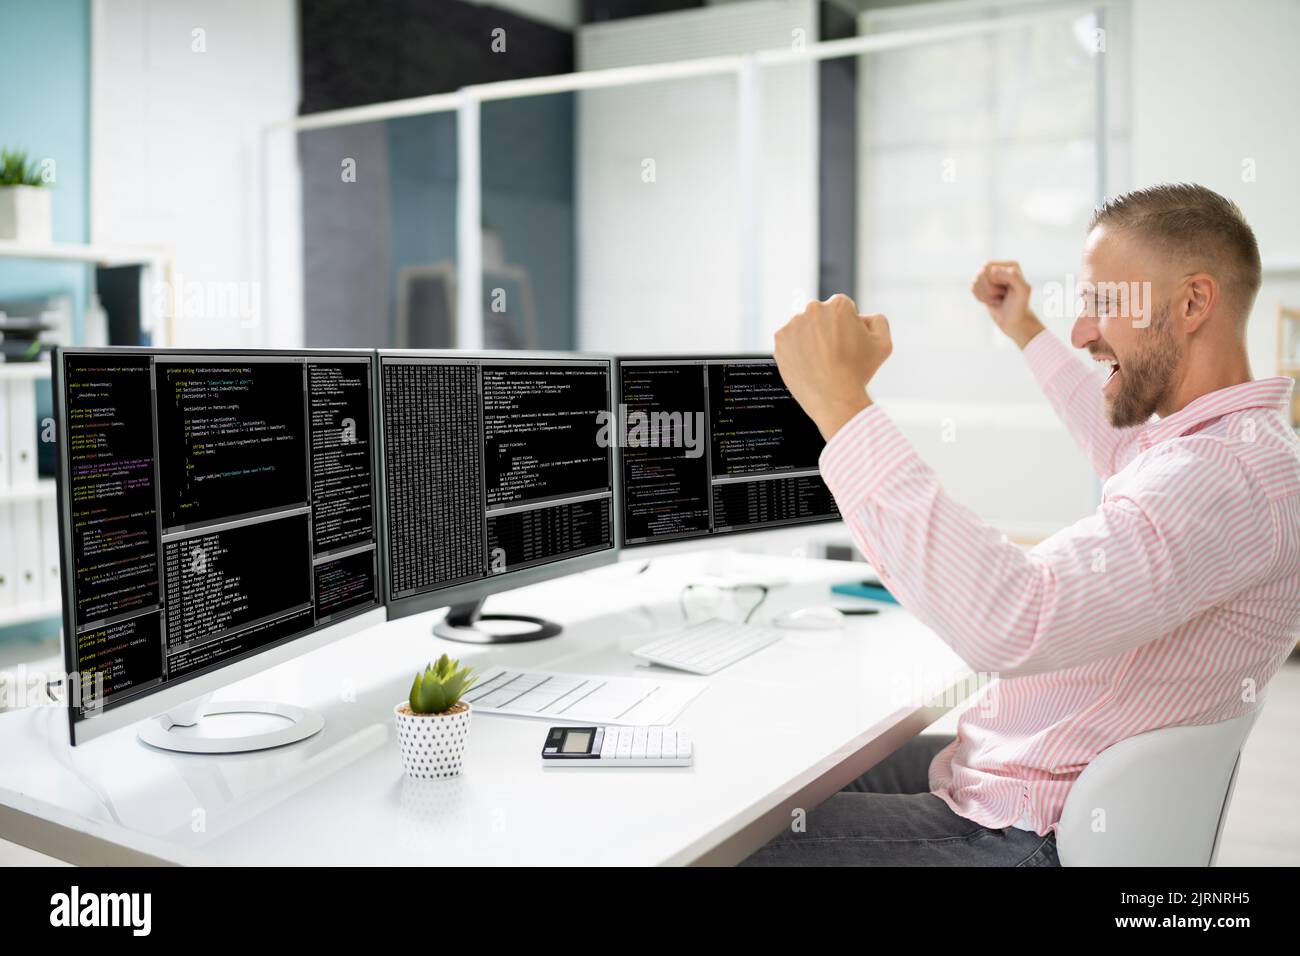 Excited Programmer Using Multiple Computer Screens. Engineer Celebrating Win Stock Photo